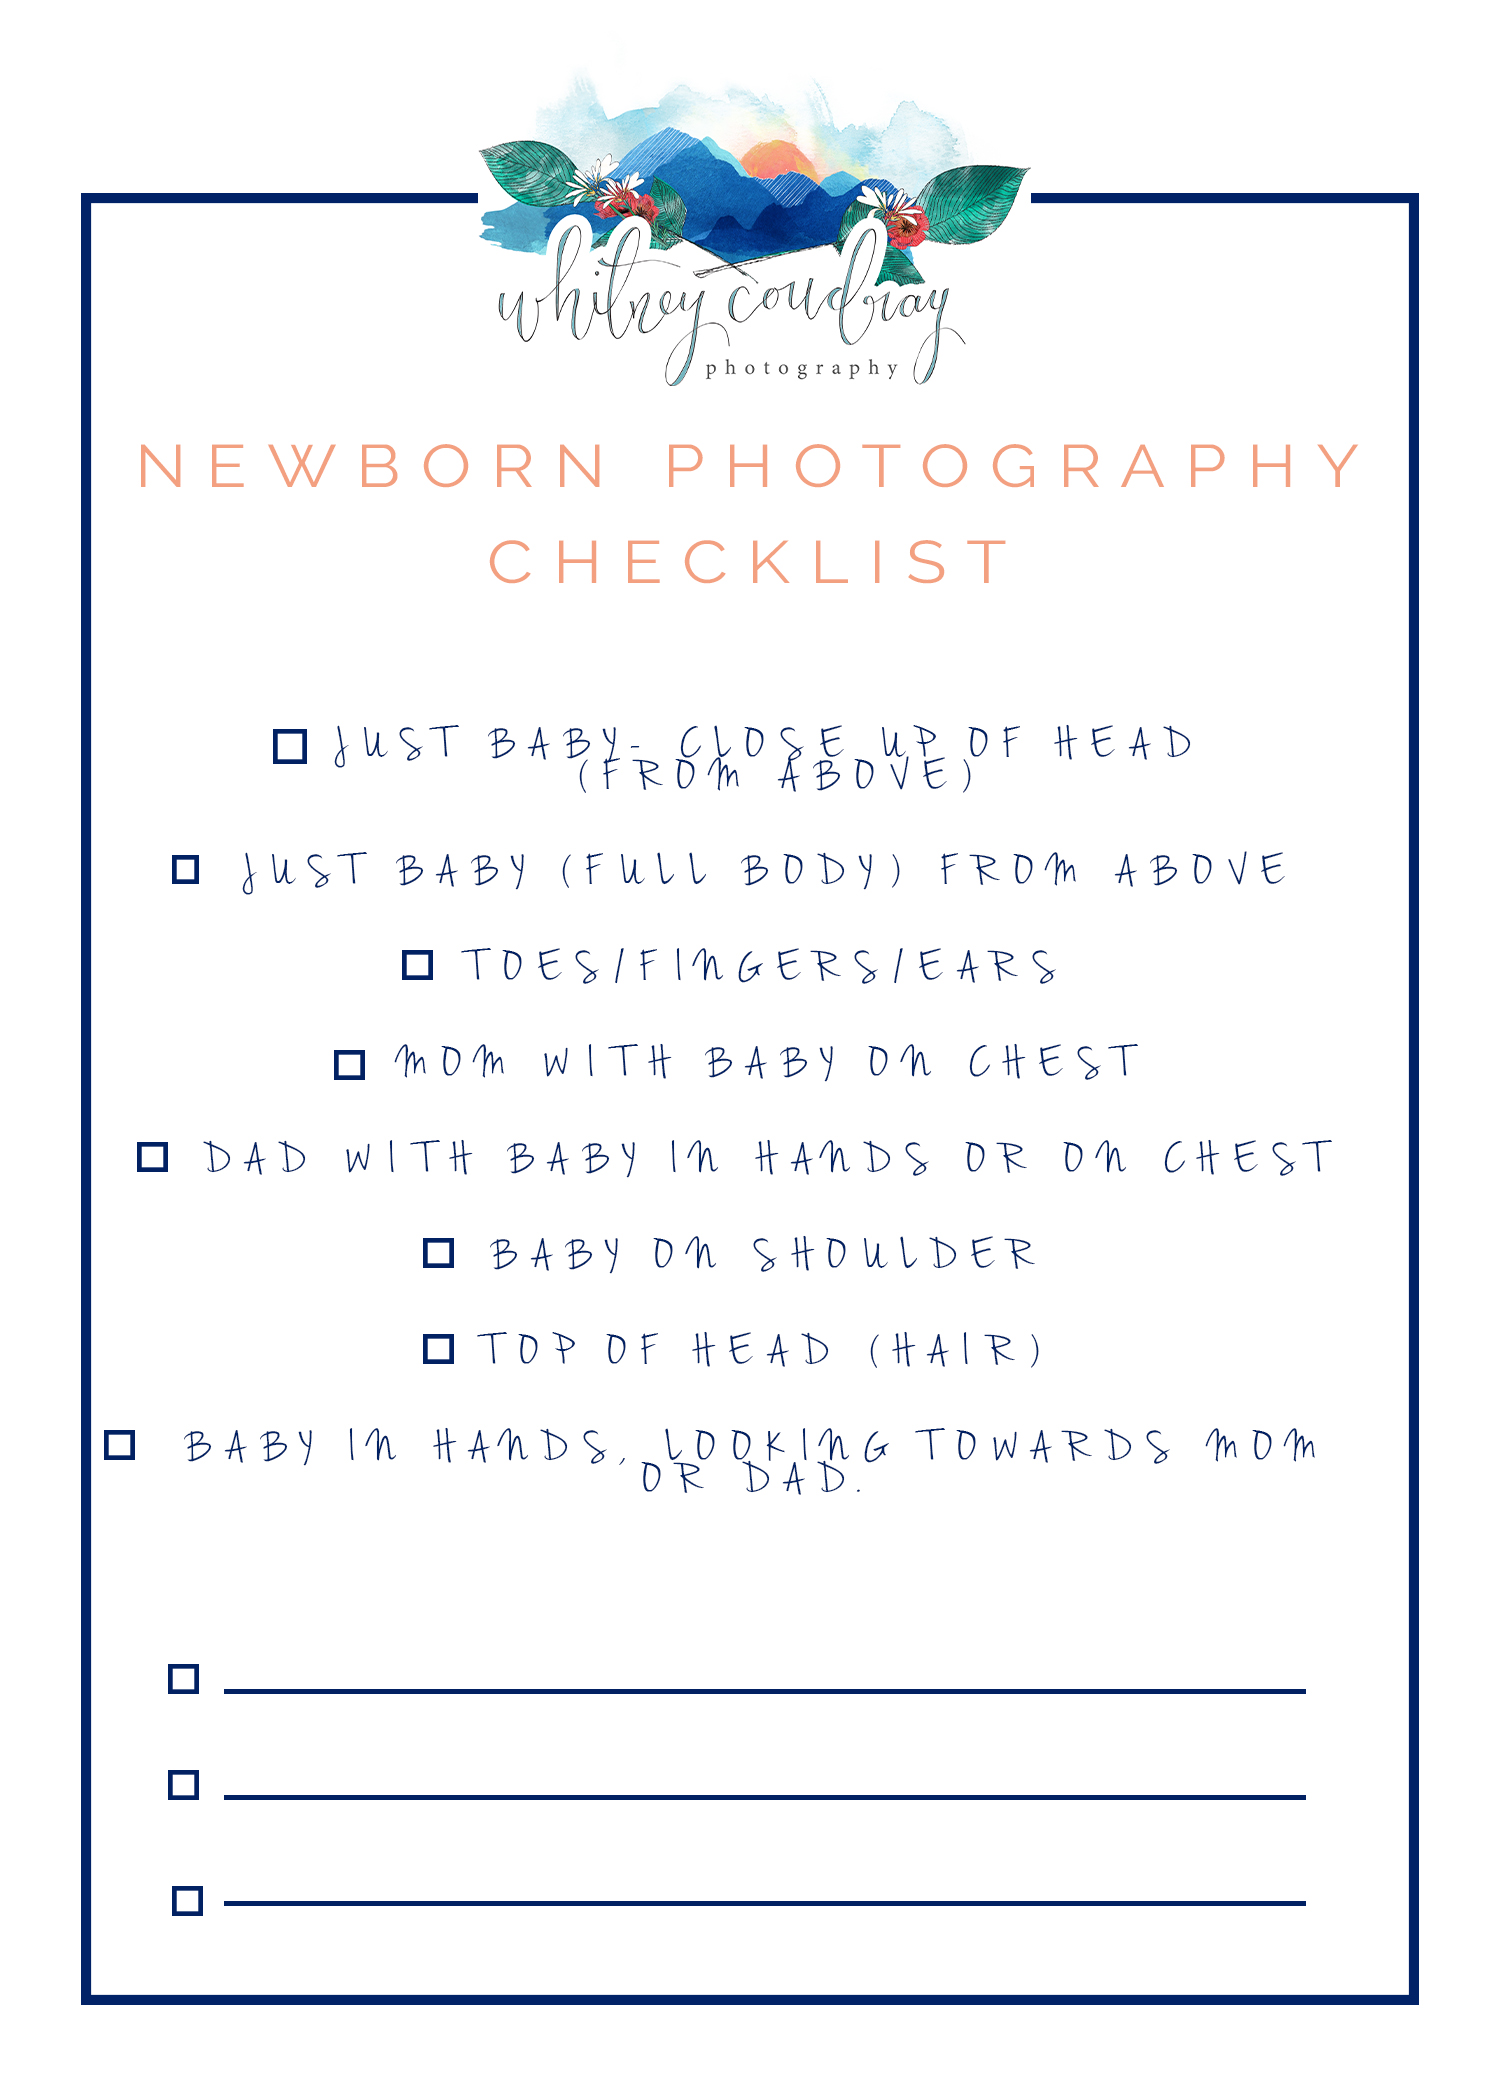 how to take your own newborn photos